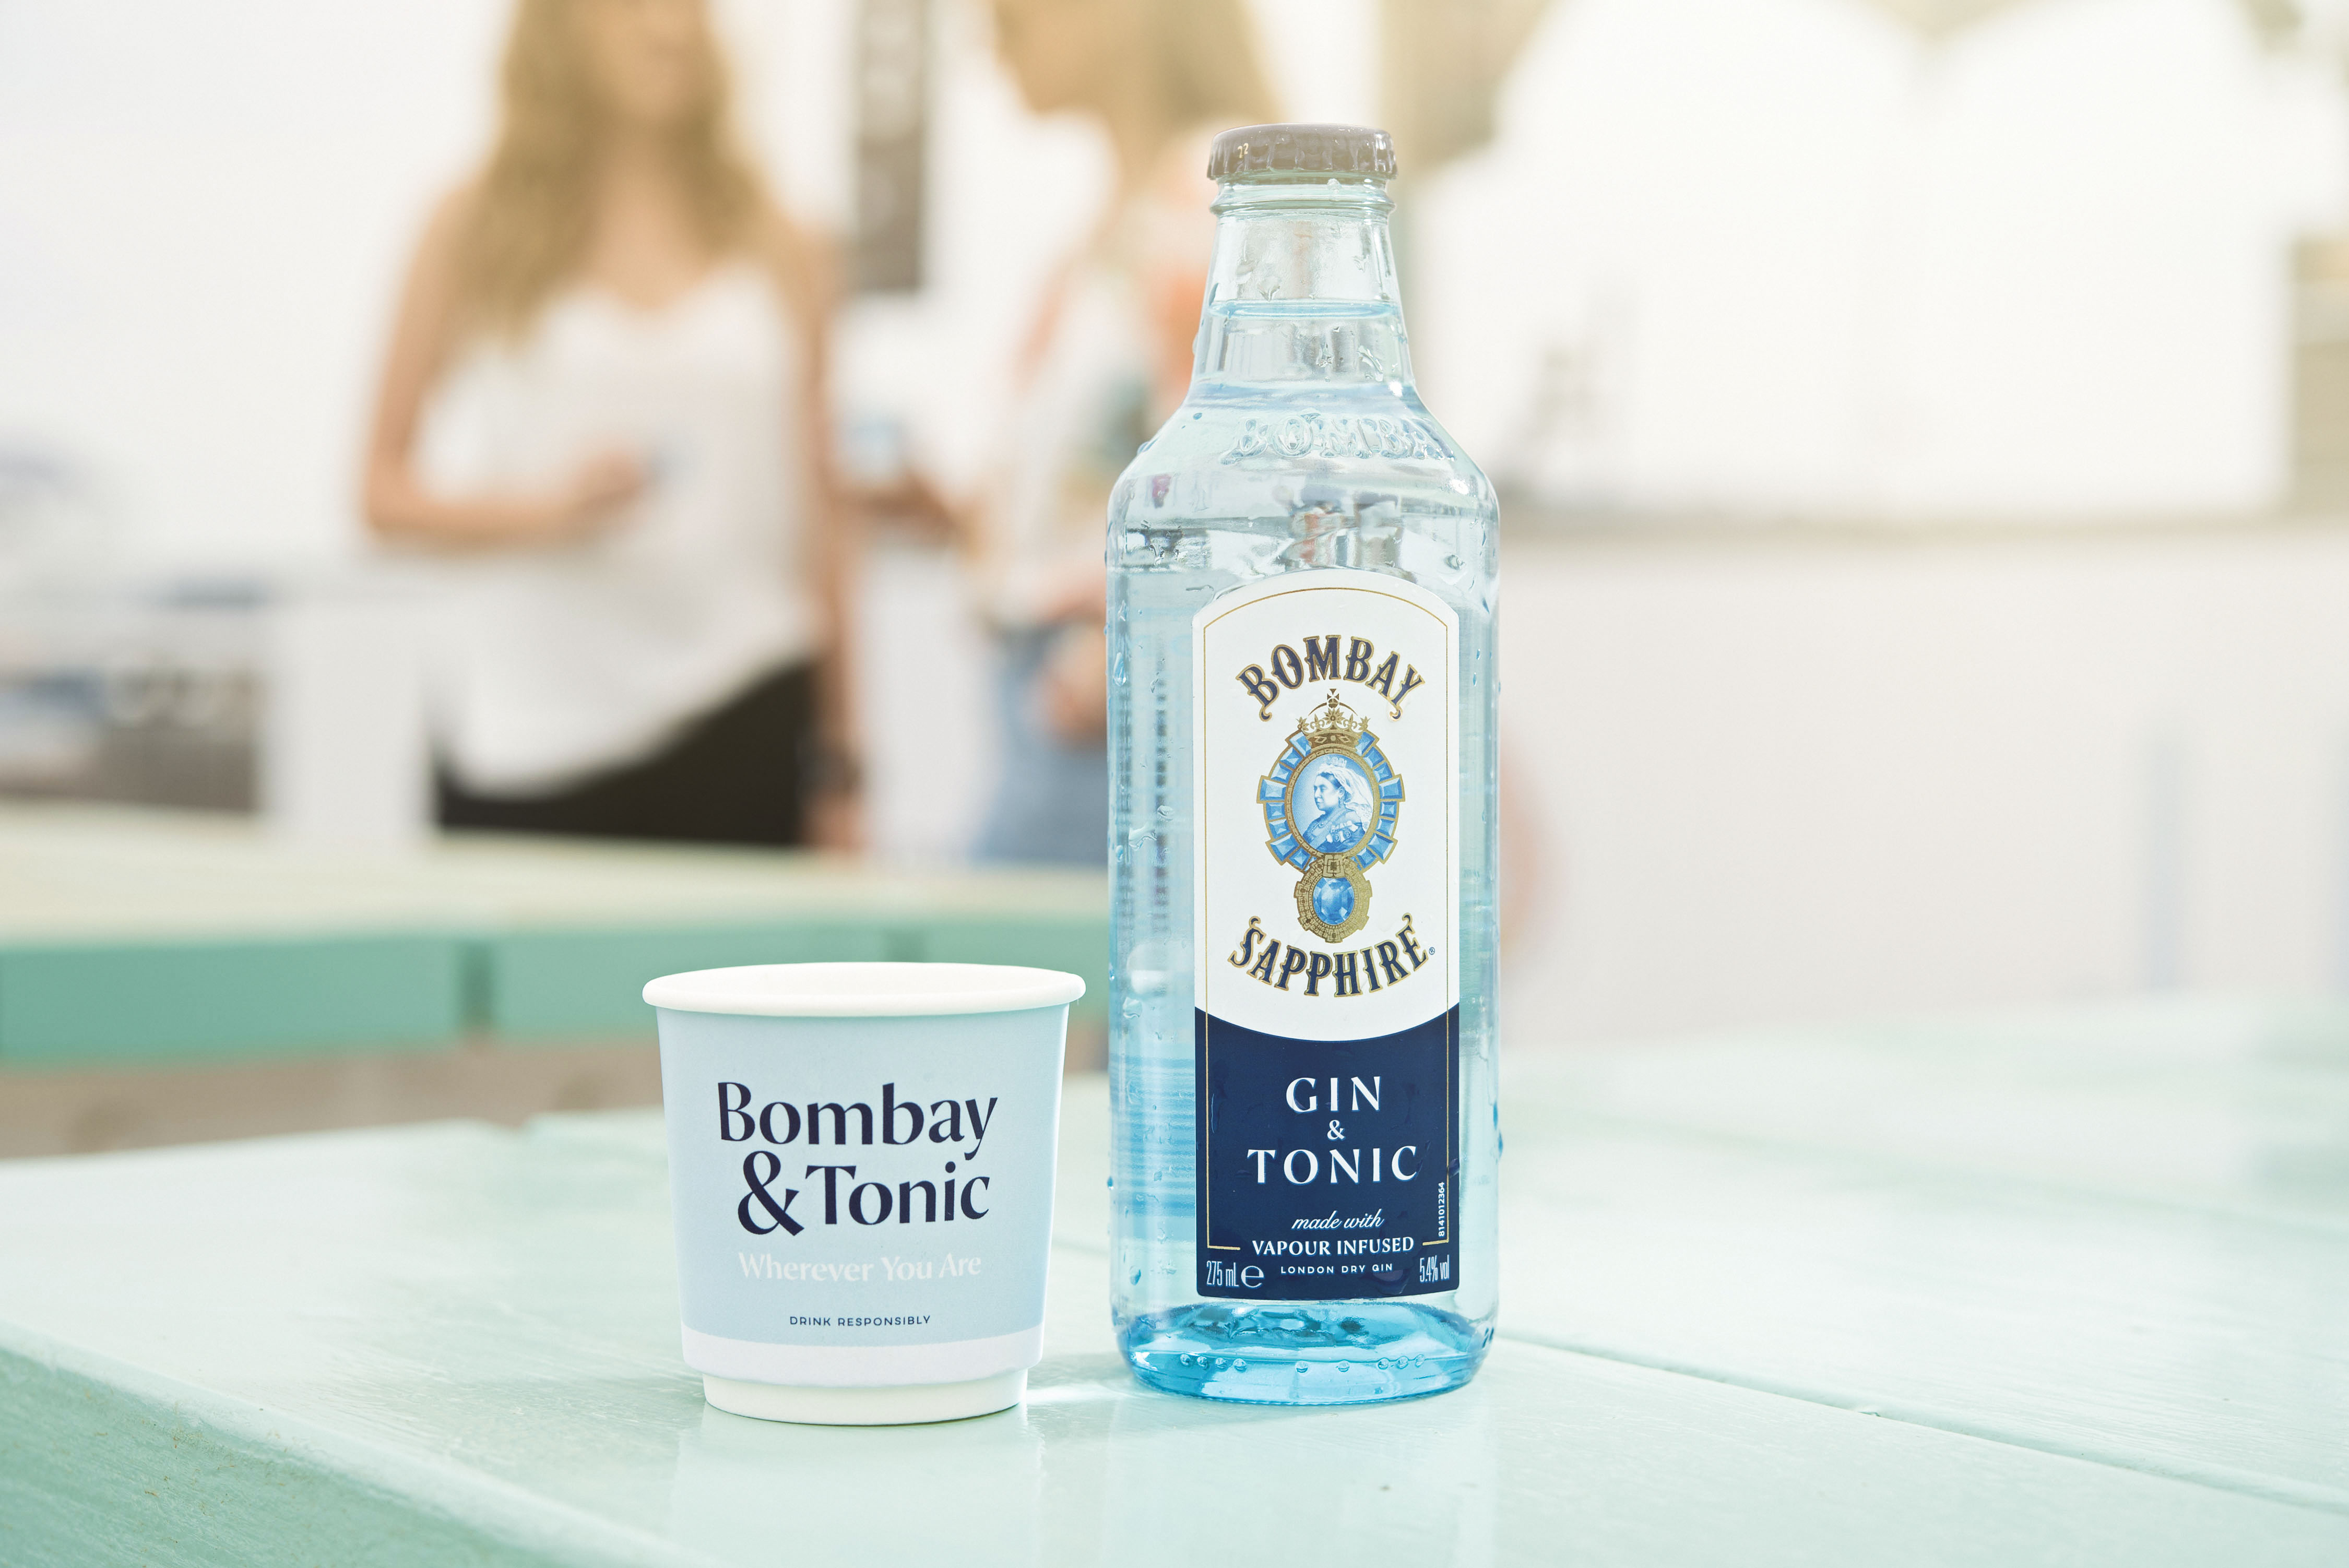 It’s time to try Bombay